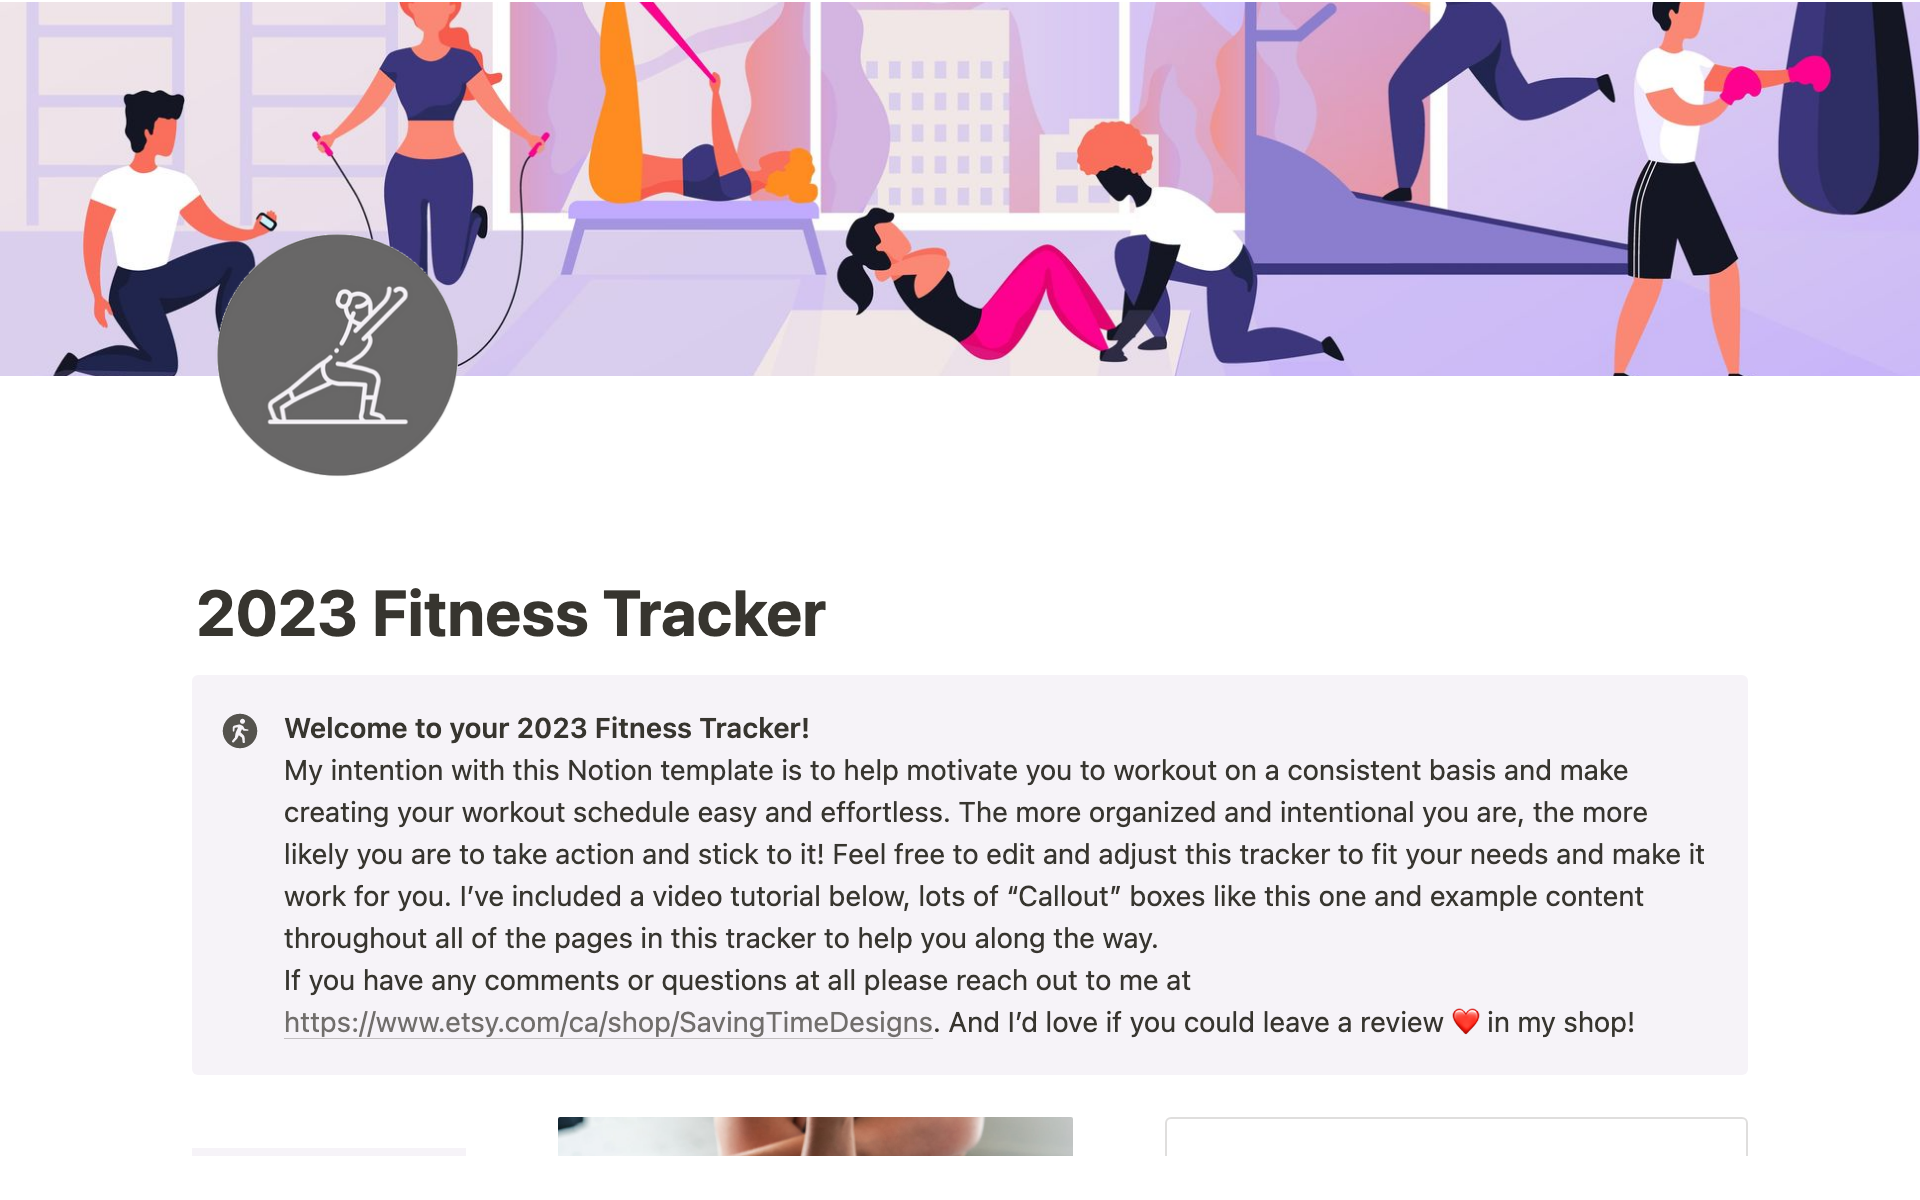 Helps people set goals and track their exercise and workout progress.